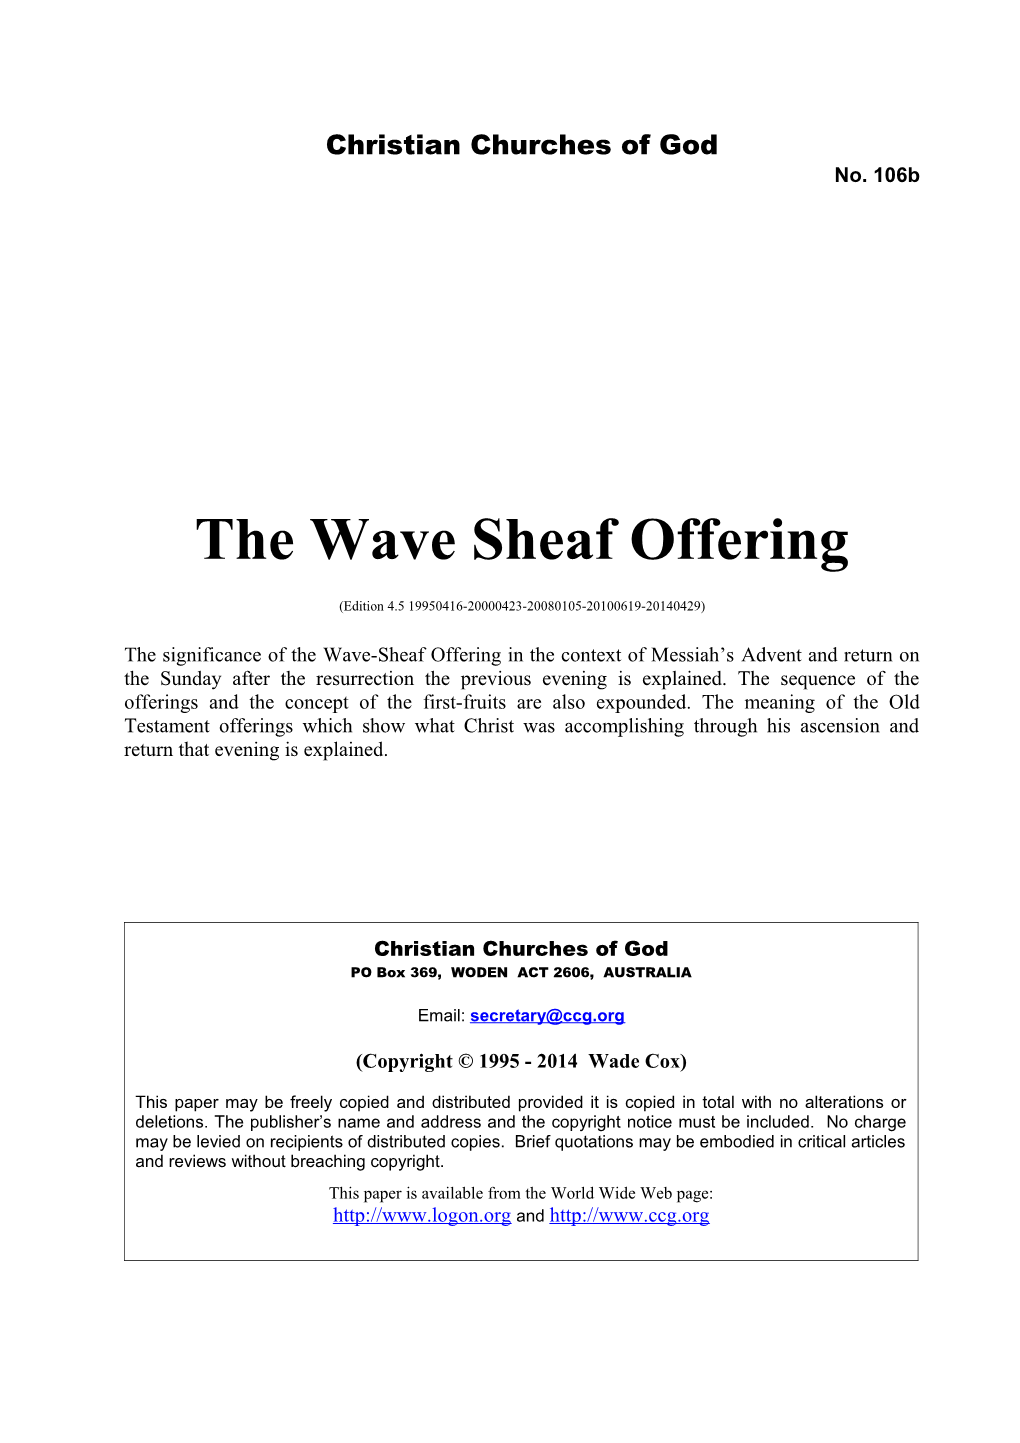 The Wave Sheaf Offering (No. 106B)